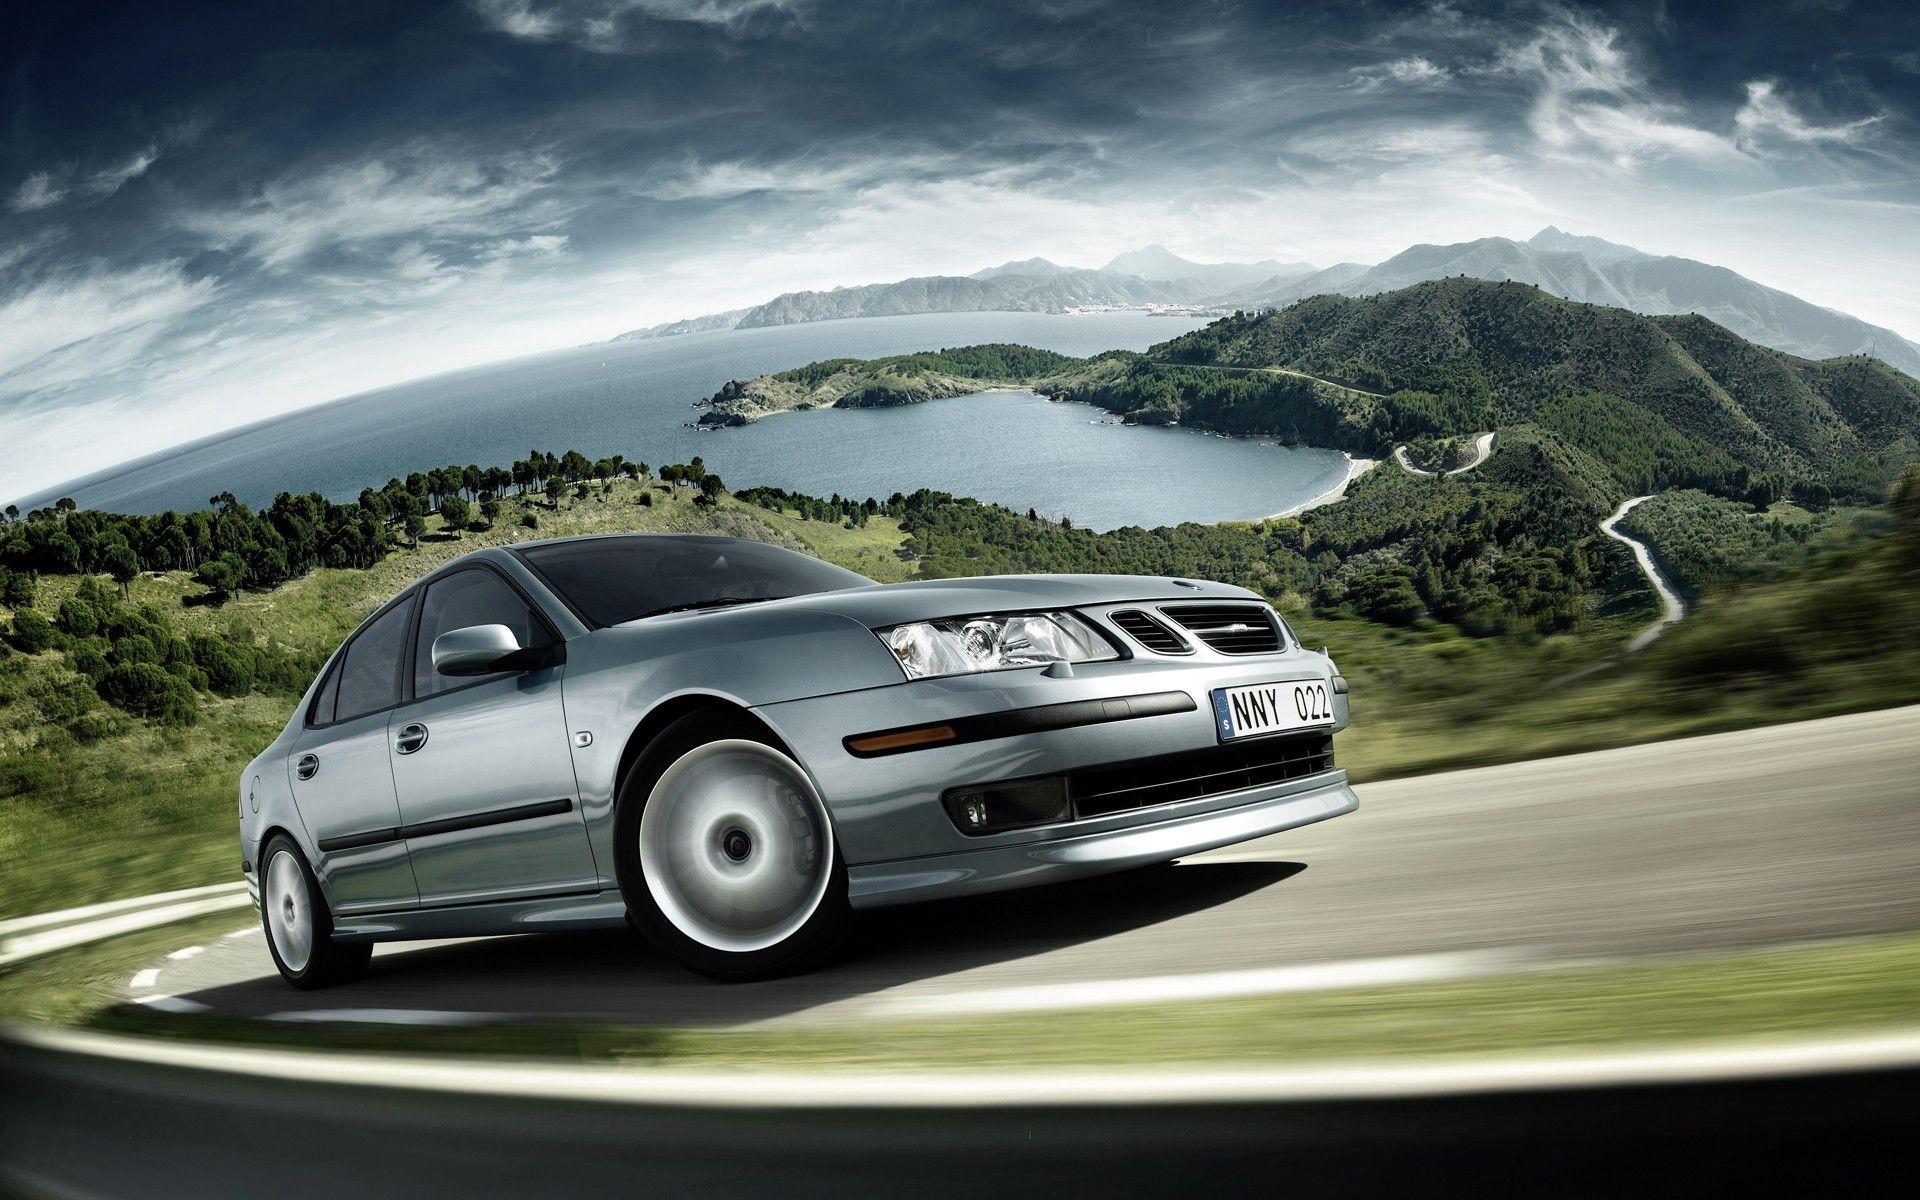 Saab Wallpaper HD Photo, Wallpaper and other Image